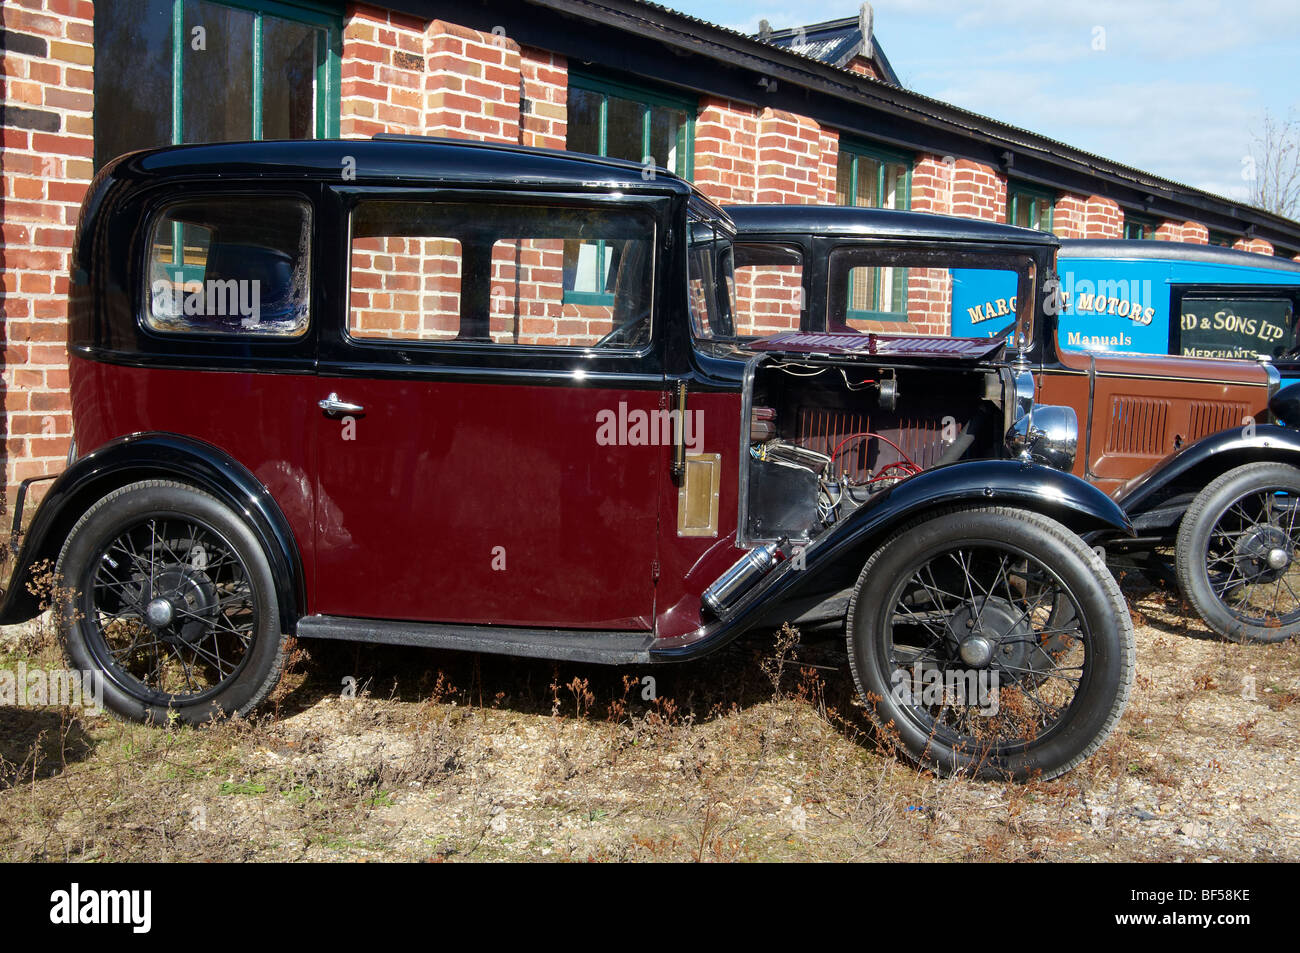 Vintage Austin 7 car from the 1930's - an immaculate 4 seater saloon. Stock Photo